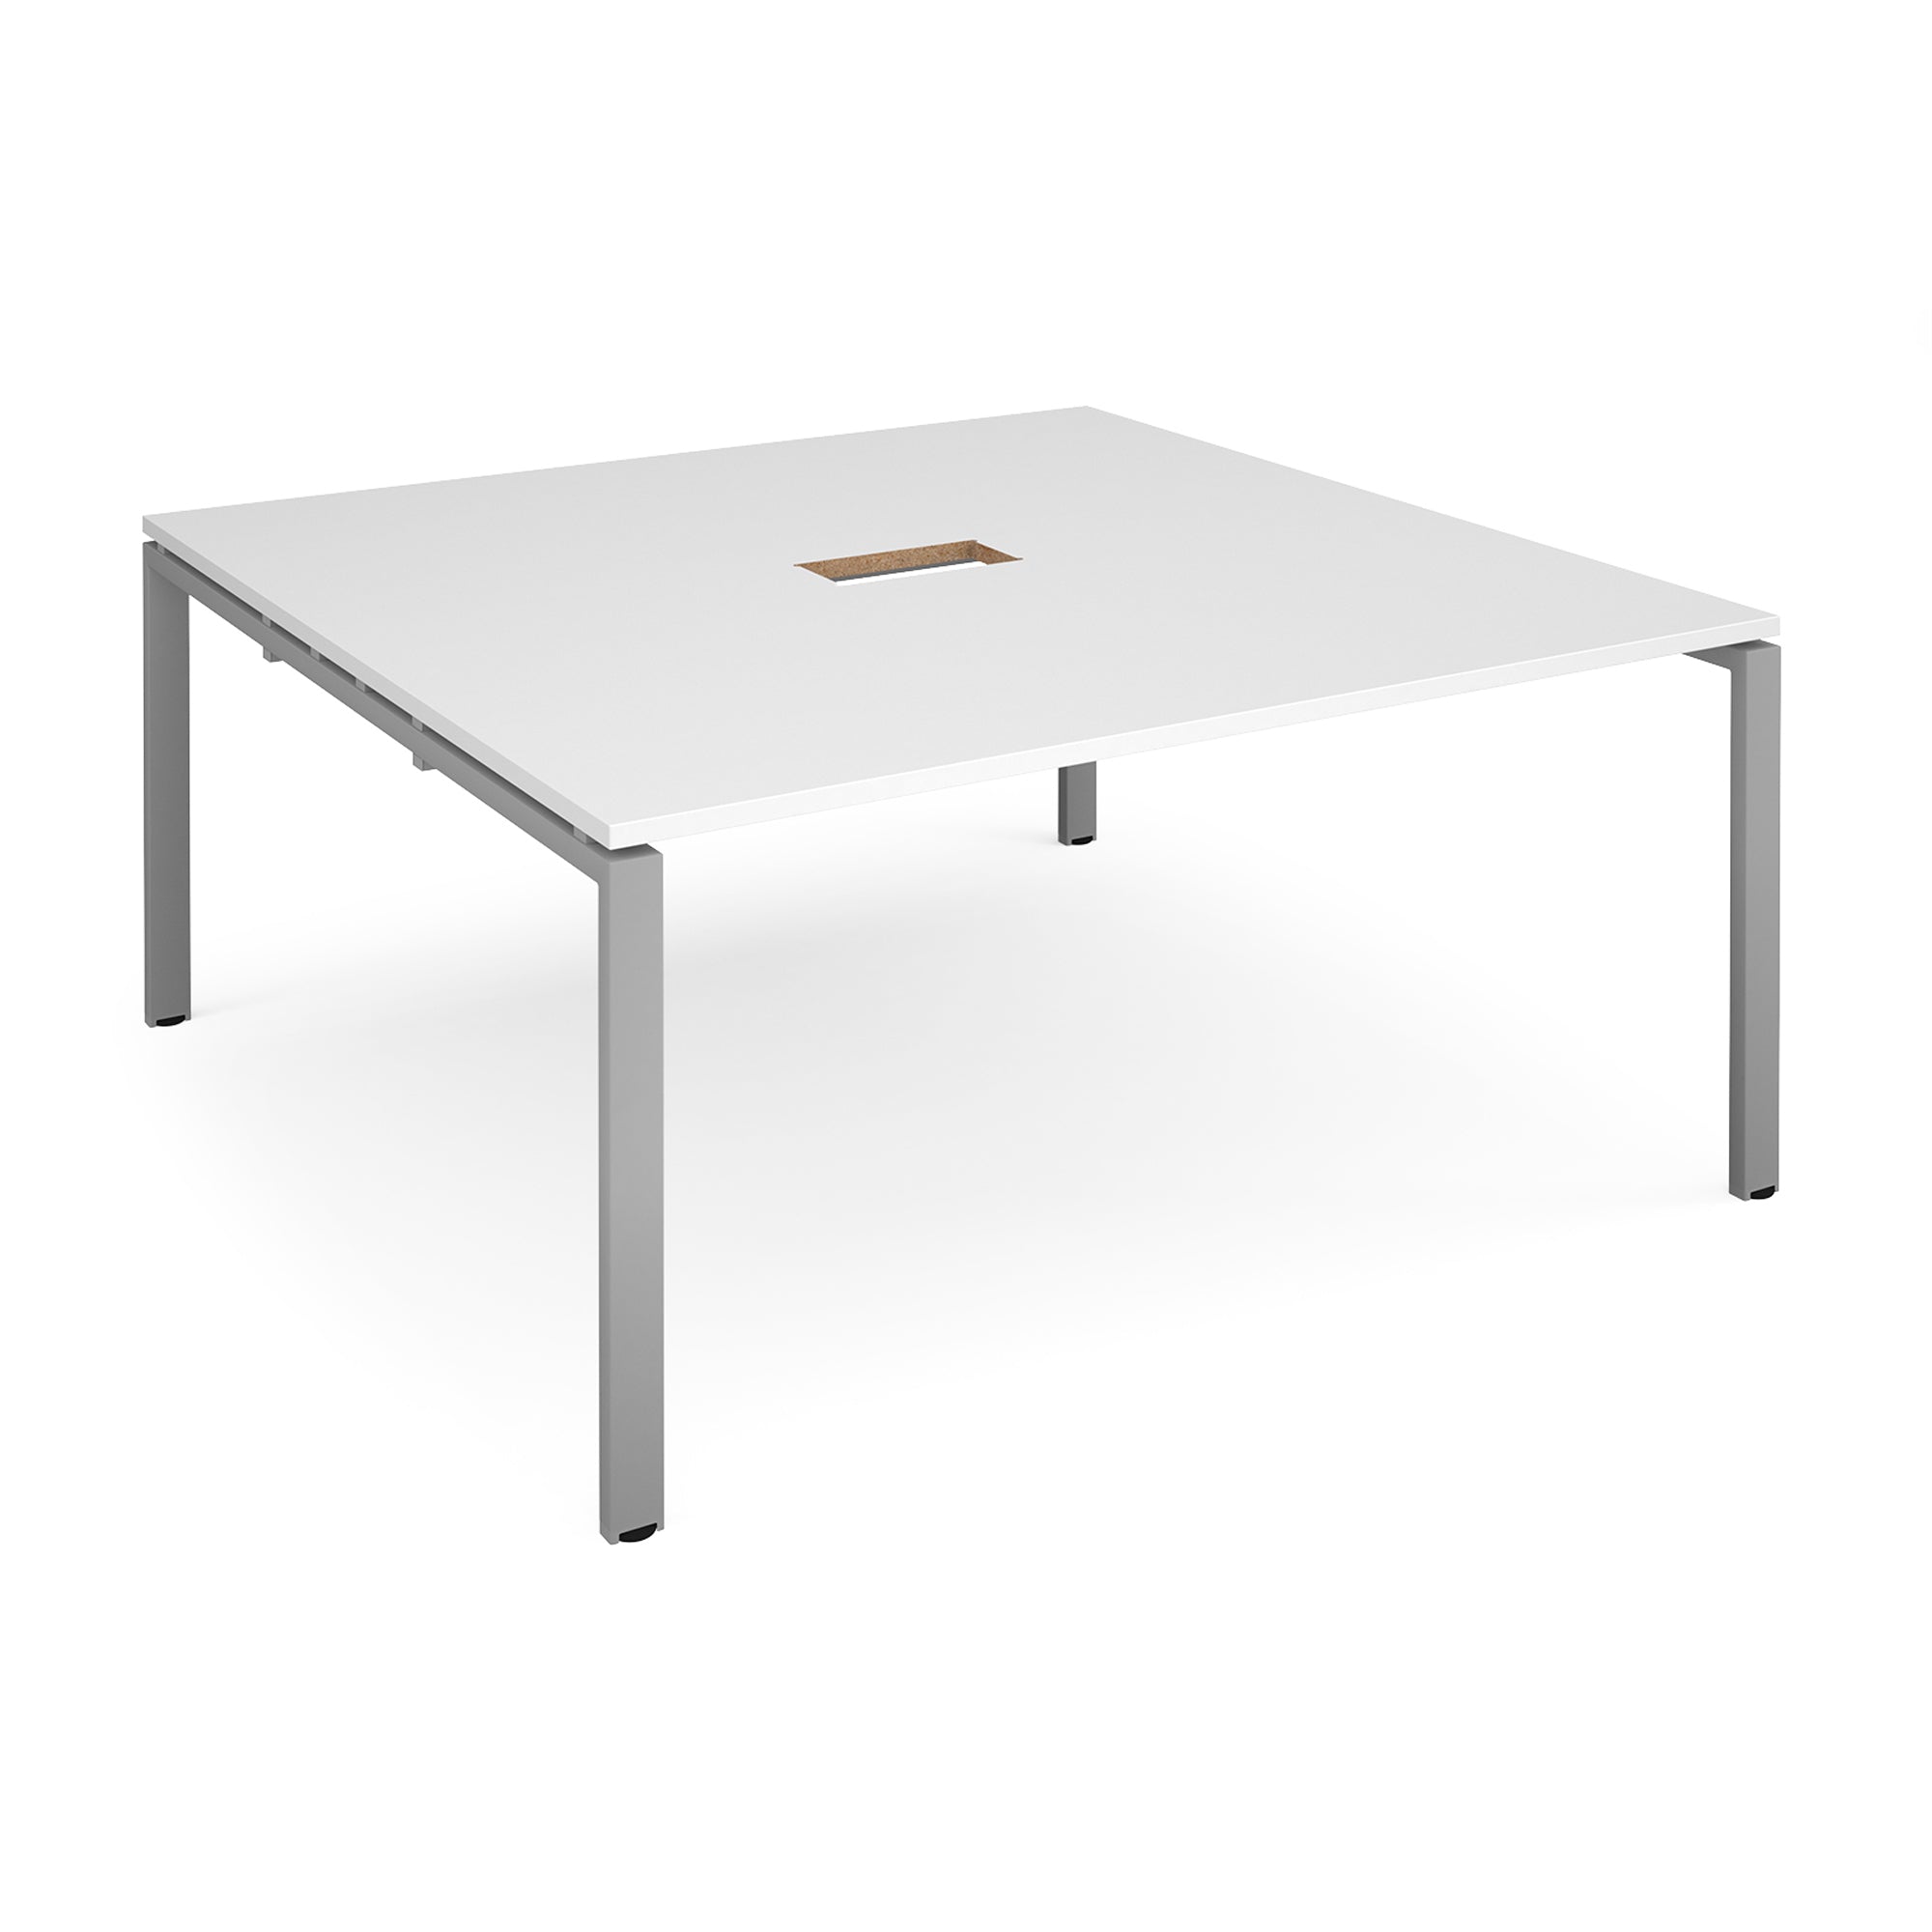 Adapt square boardroom table with central cutout - Office Products Online